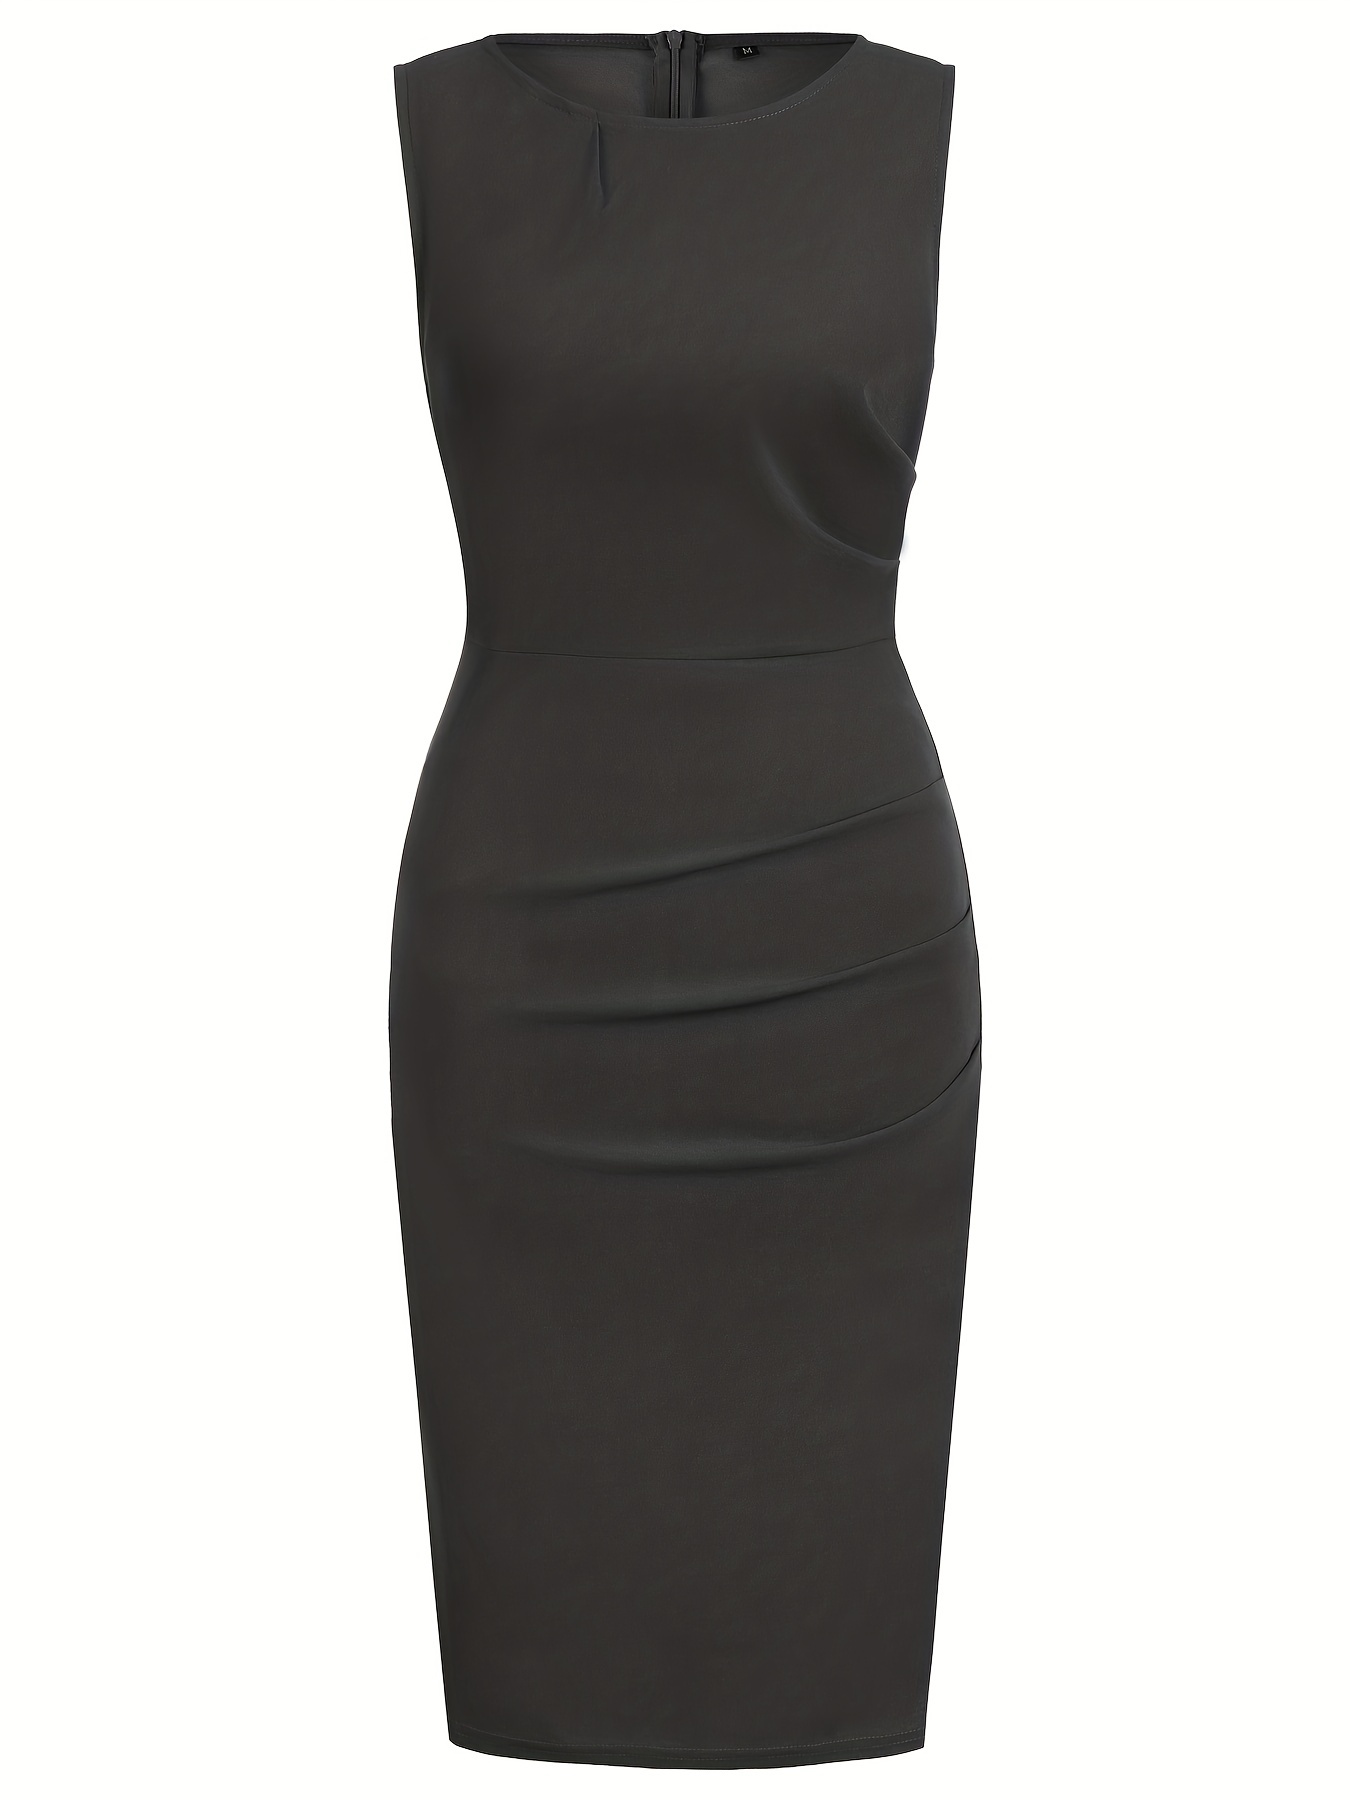 ruched pencil dress elegant crew neck sleeveless work office dress womens clothing details 2